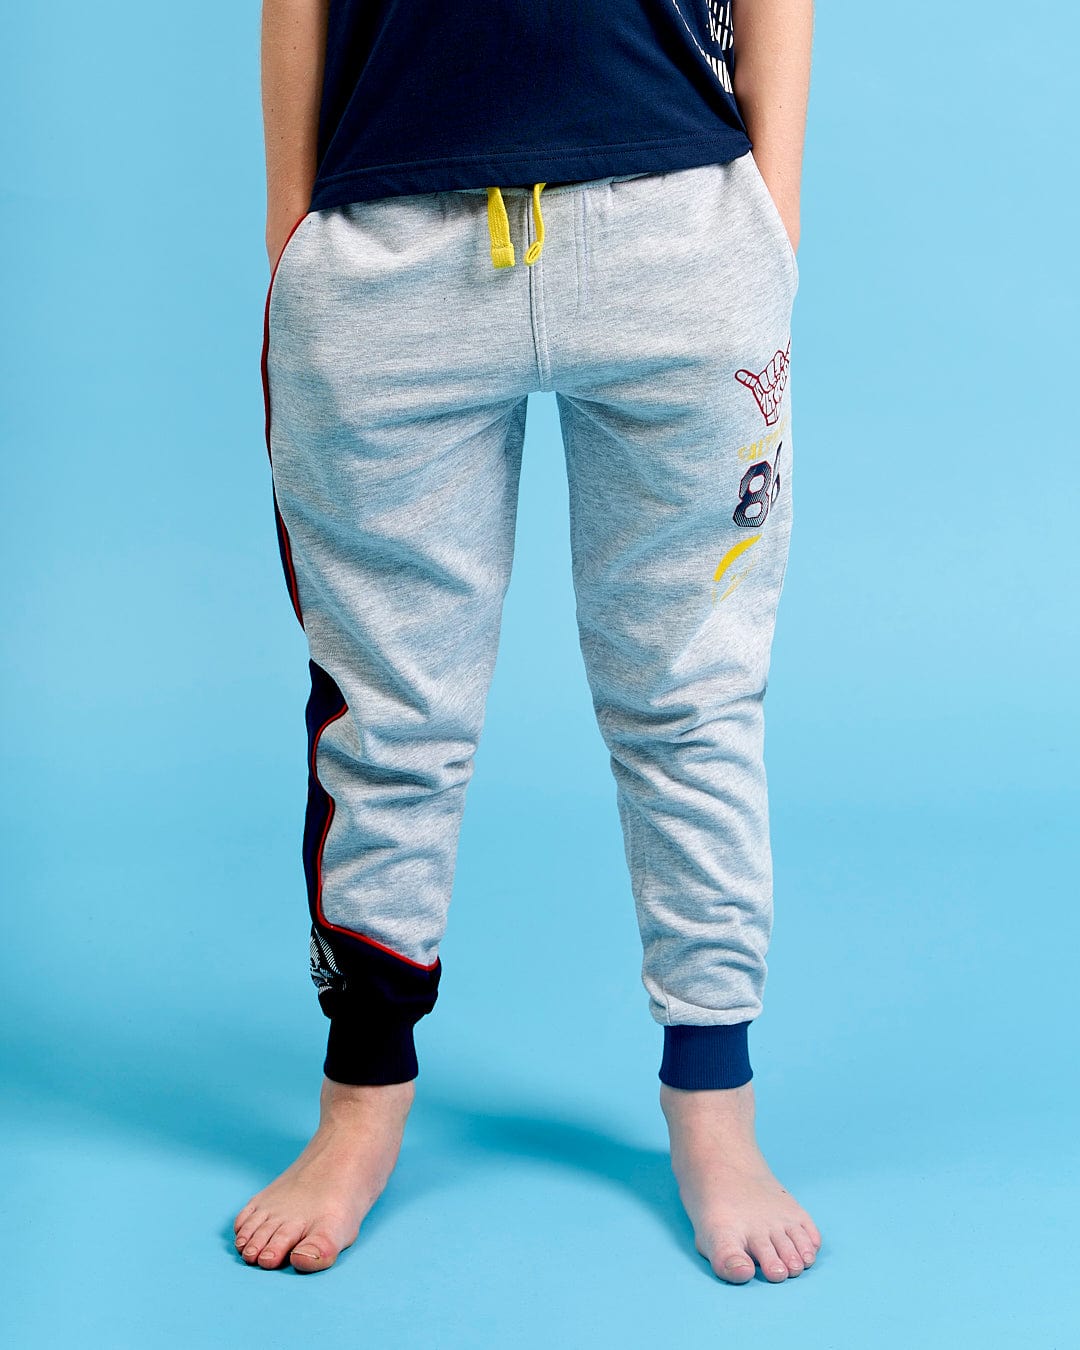 A young boy wearing a pair of Saltrock Curby - Kids Jogger - Grey jogging pants.